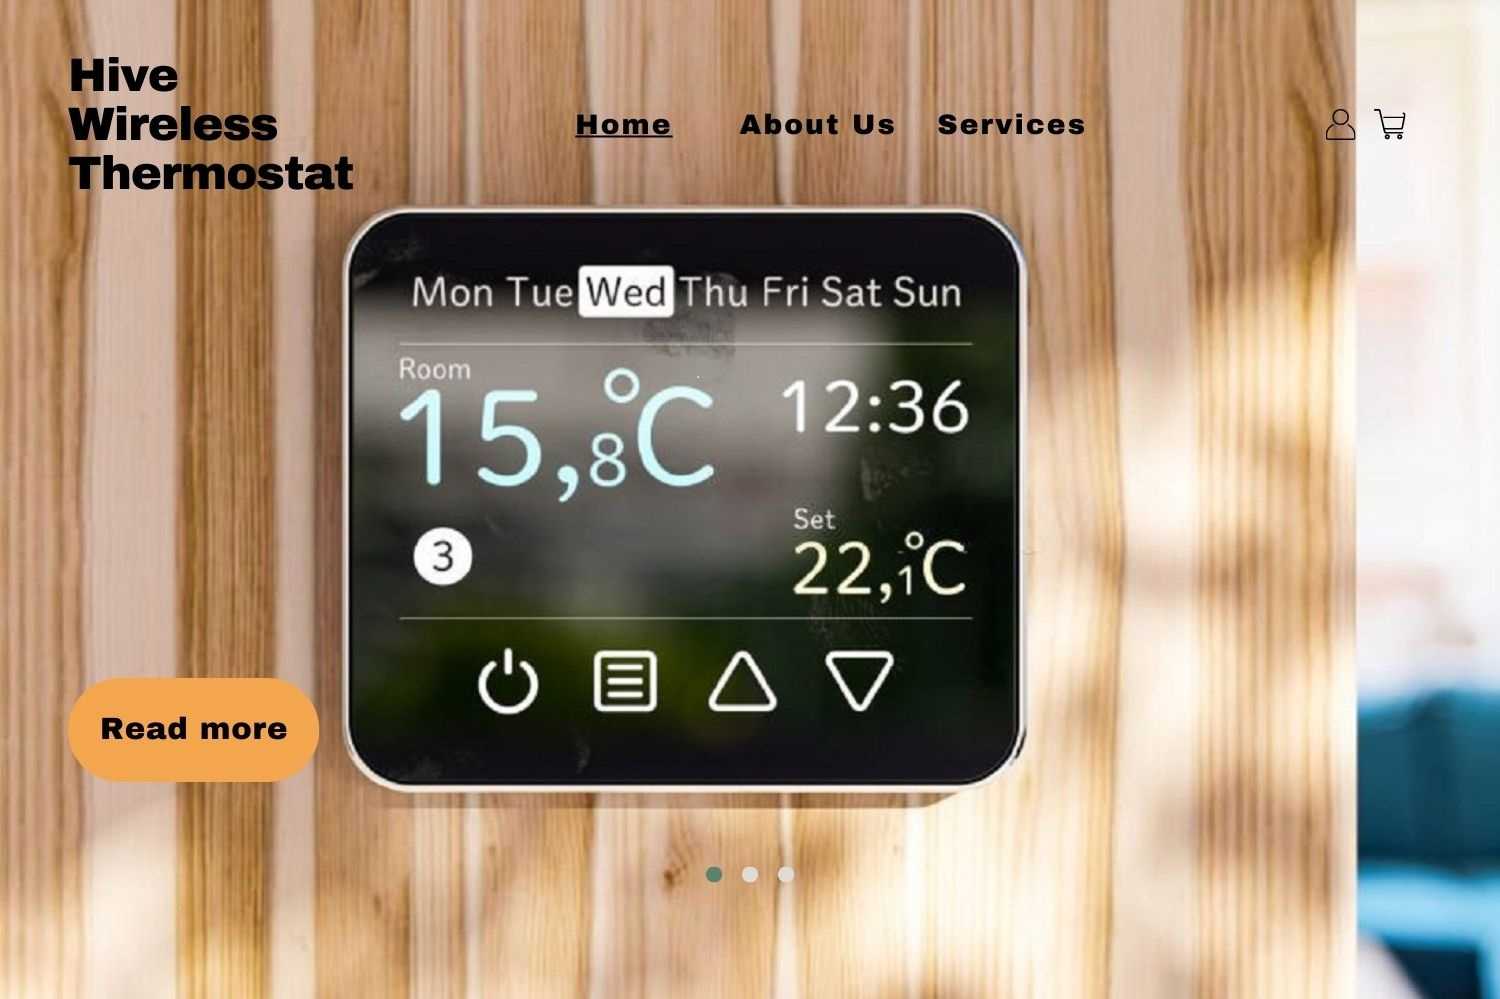 Hive Wireless Thermostat work with all HVAC systems